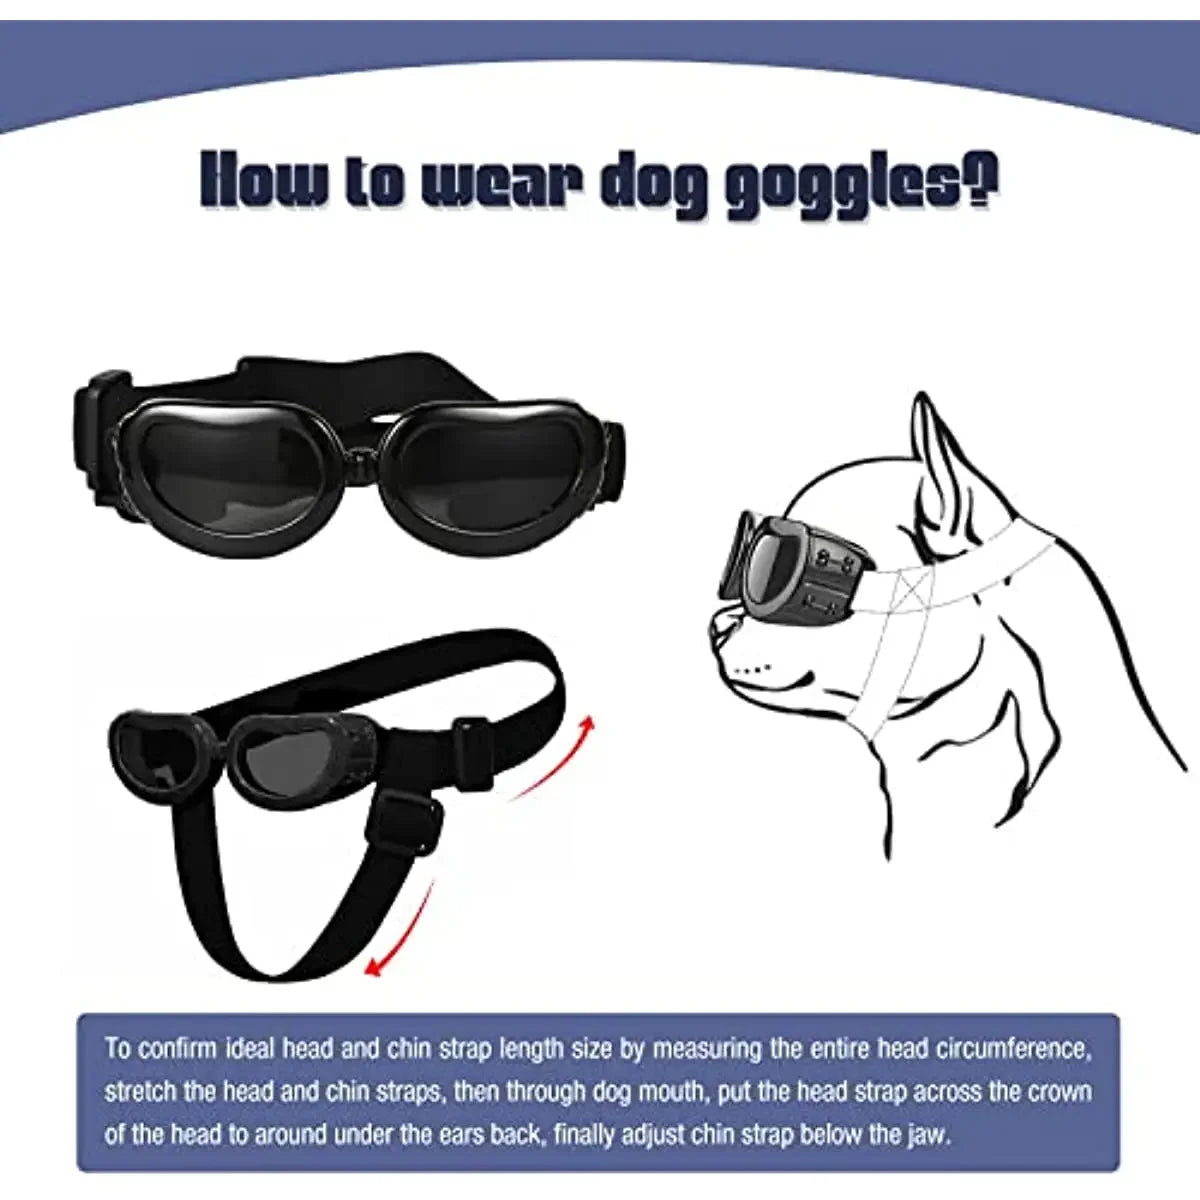 ATUBAN Small Dog Goggles with Helmet UV Protection Adjustable Doggy Sungalsses Windproof Antifogging Motorcycle Puppy Glasses